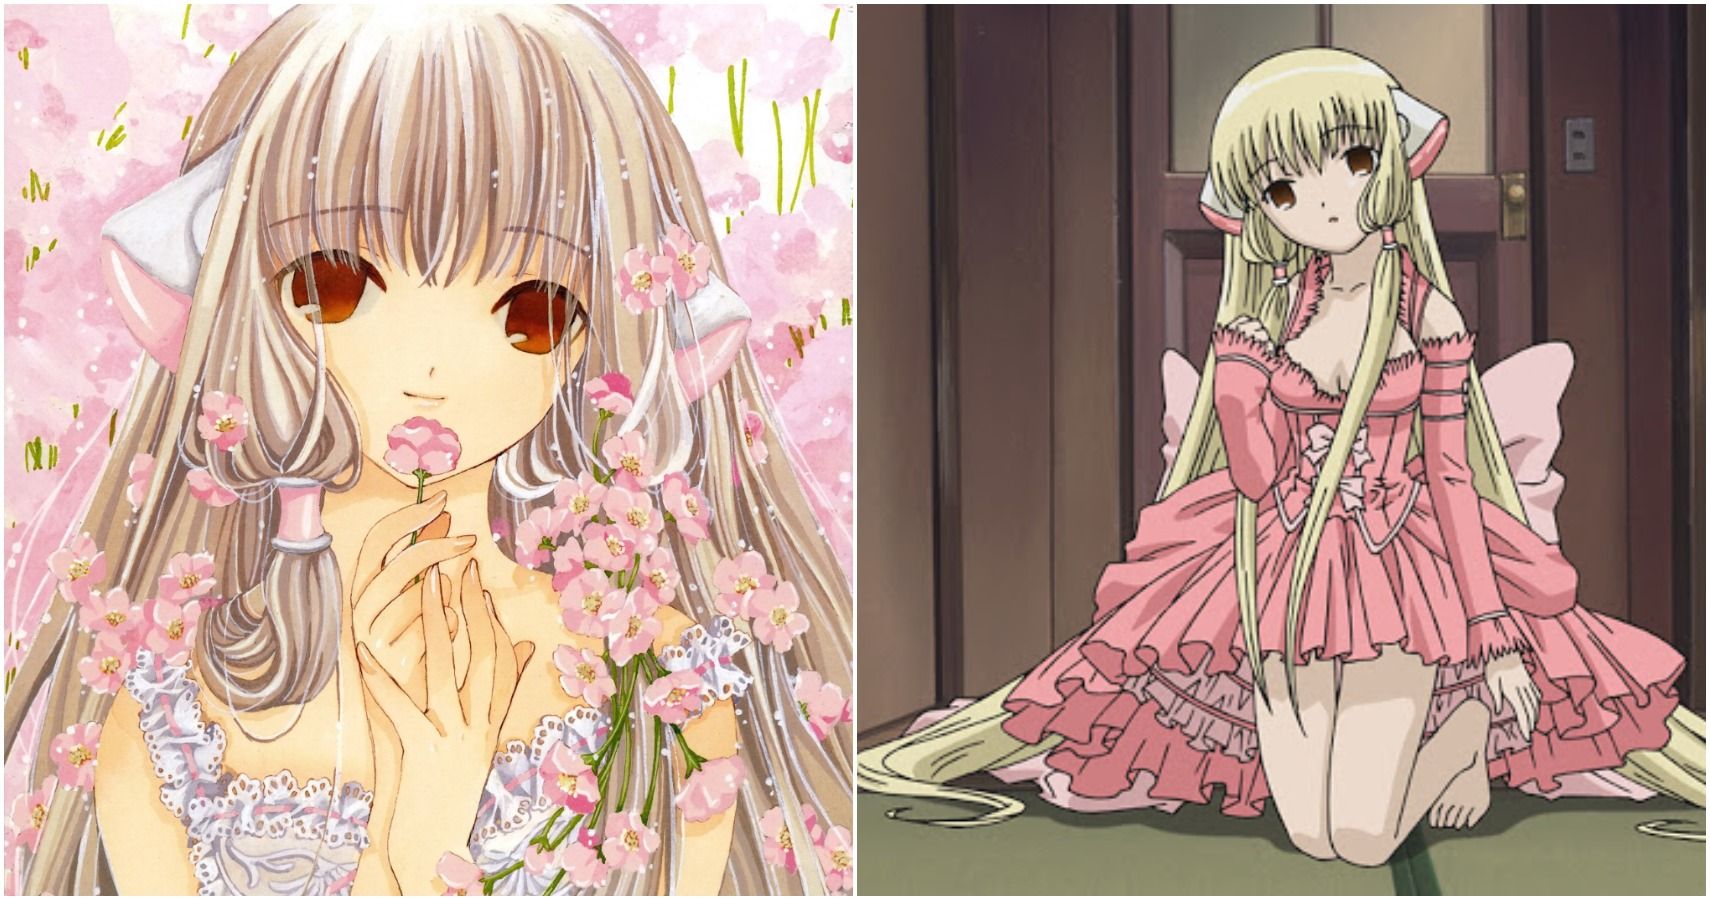 The Existentialism Of Chobits